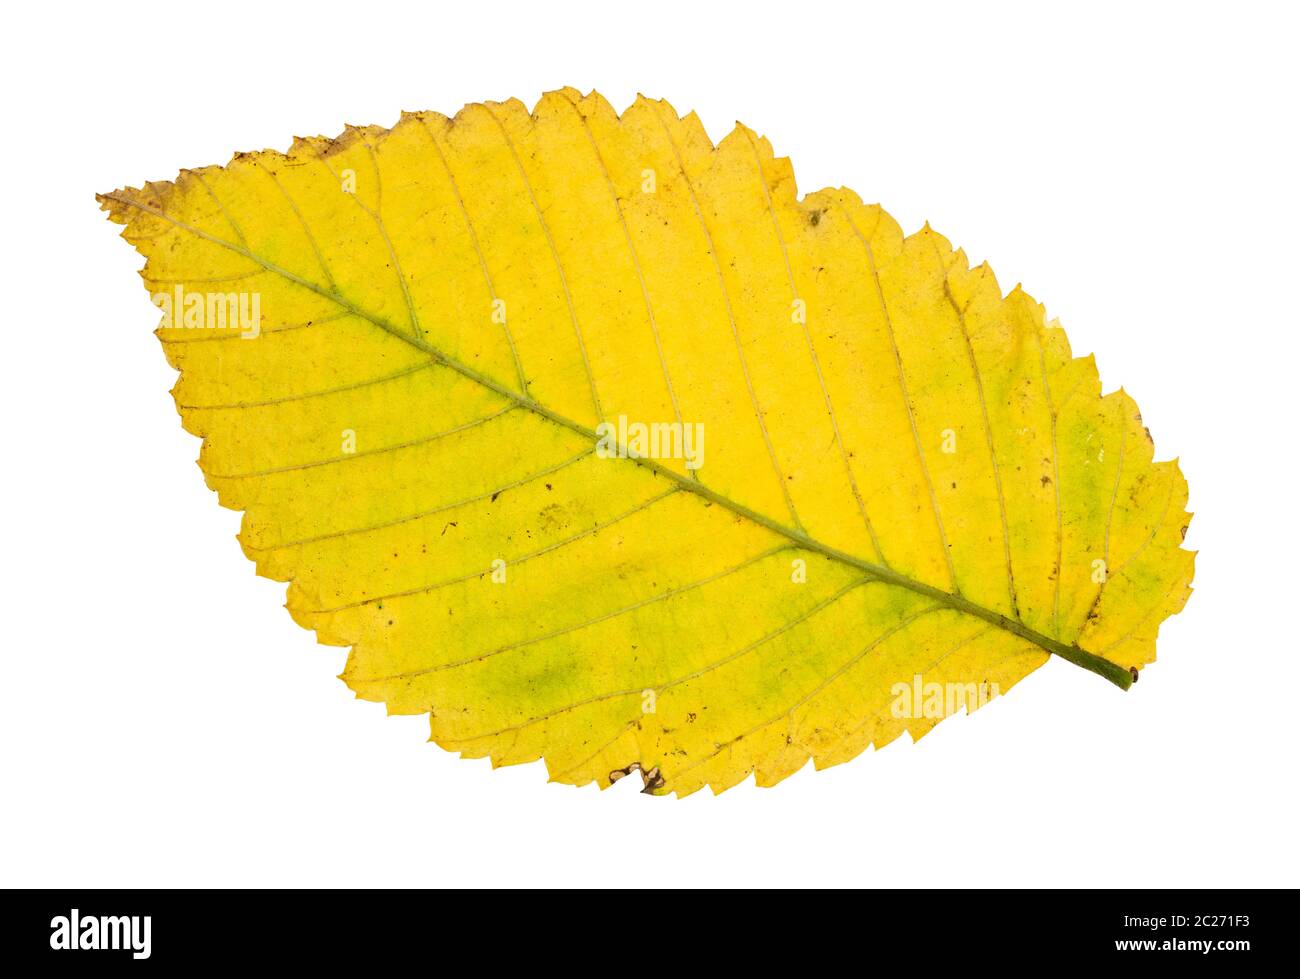 back side of fallen yellow leaf of elm tree isolated on white background Stock Photo